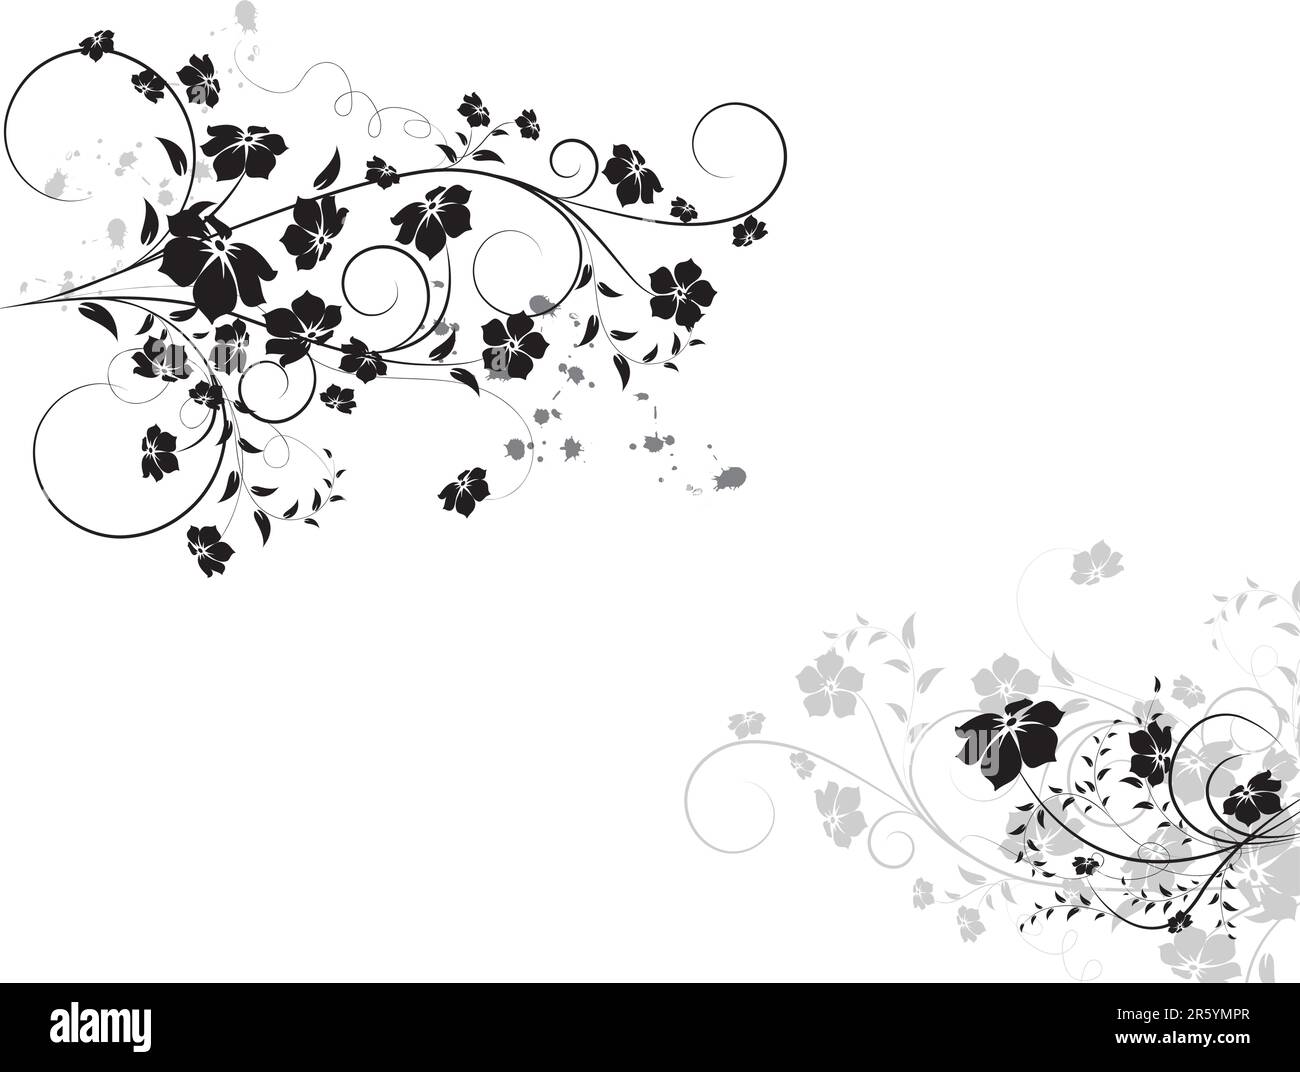 Floral illustration. Can be used for design. Stock Vector